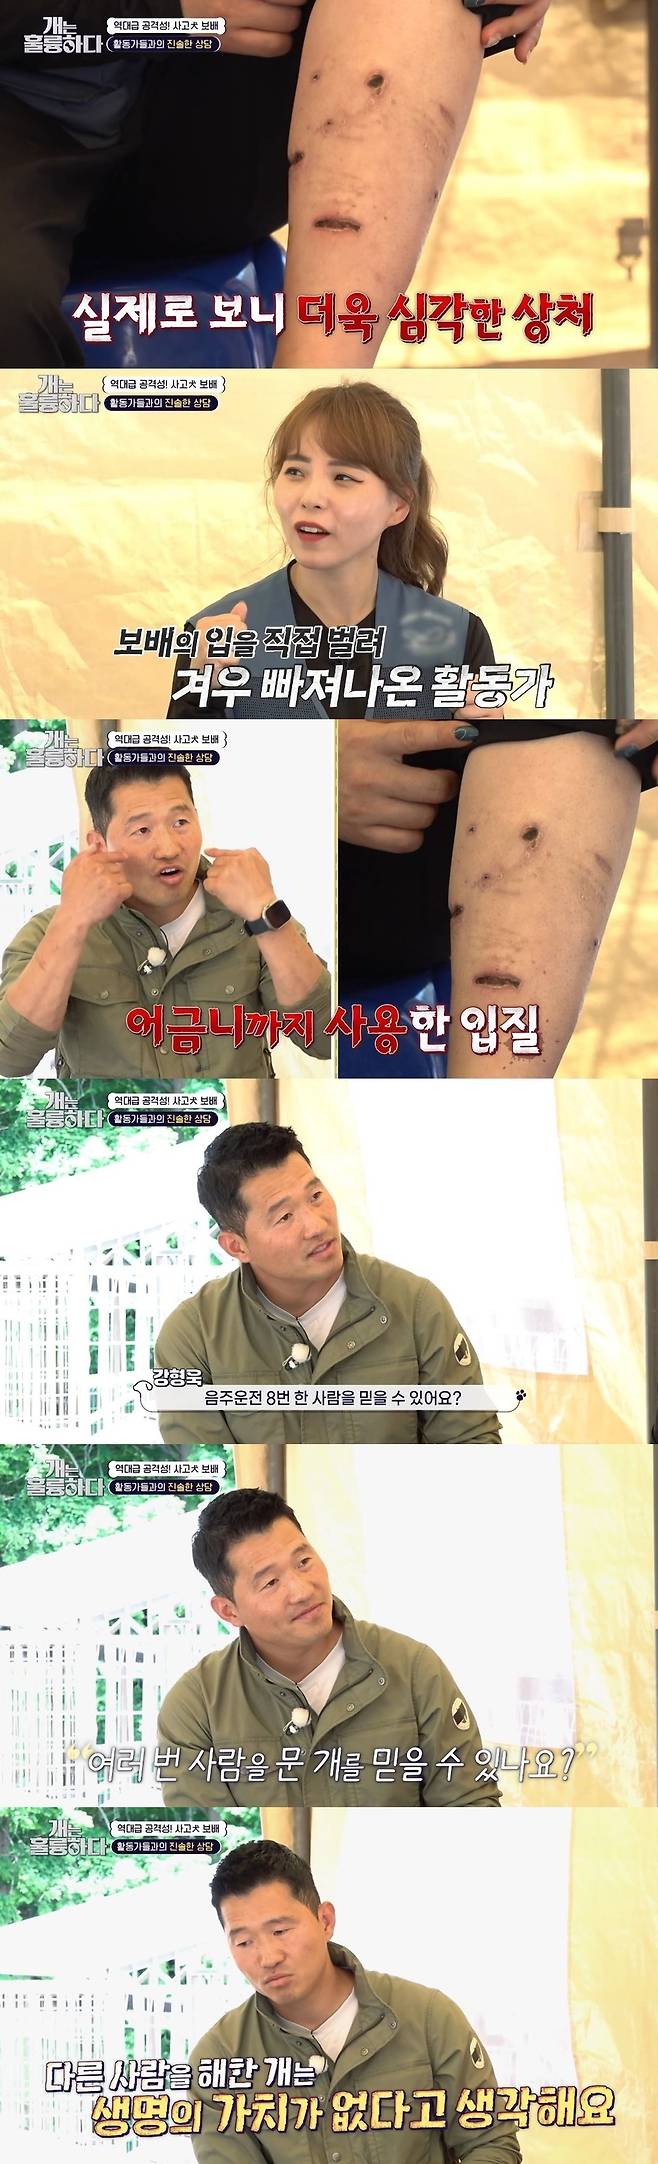 Kang Hyung-wook talked about the treatment of accident.On June 19, KBS 2TV Dogs Are Incredible introduced an accident dog treasure of treasure that asked Grandmas Boy in the 80s neighborhood in Jindo.On this day, Kang Hyung-wook paid attention to the injuries of an activist who was greatly bitten by the treasure of treasure.An activist who bit his leg recalled, I went in to lay a futon and thought that the line would not be pulled, so I tried to put it in the corner and put a futon on it.An activist said, I was biting and shaking. I thought I could not get out, so later I opened my mouth and took my legs out even if it was dangerous.Kang Hyung-wook looked at the wound and said, This is a bite using a molar, but it was trying to kill it.Can you believe someone who has drunk eight times? I never believe it, he said of the treasure of treasure. I can not ask whose life is worth more.I can not say that the lives of those friends who hurt others are worthy. It is my personal opinion. The most important thing is that an activist gives strength to many children who need help without being hurt.